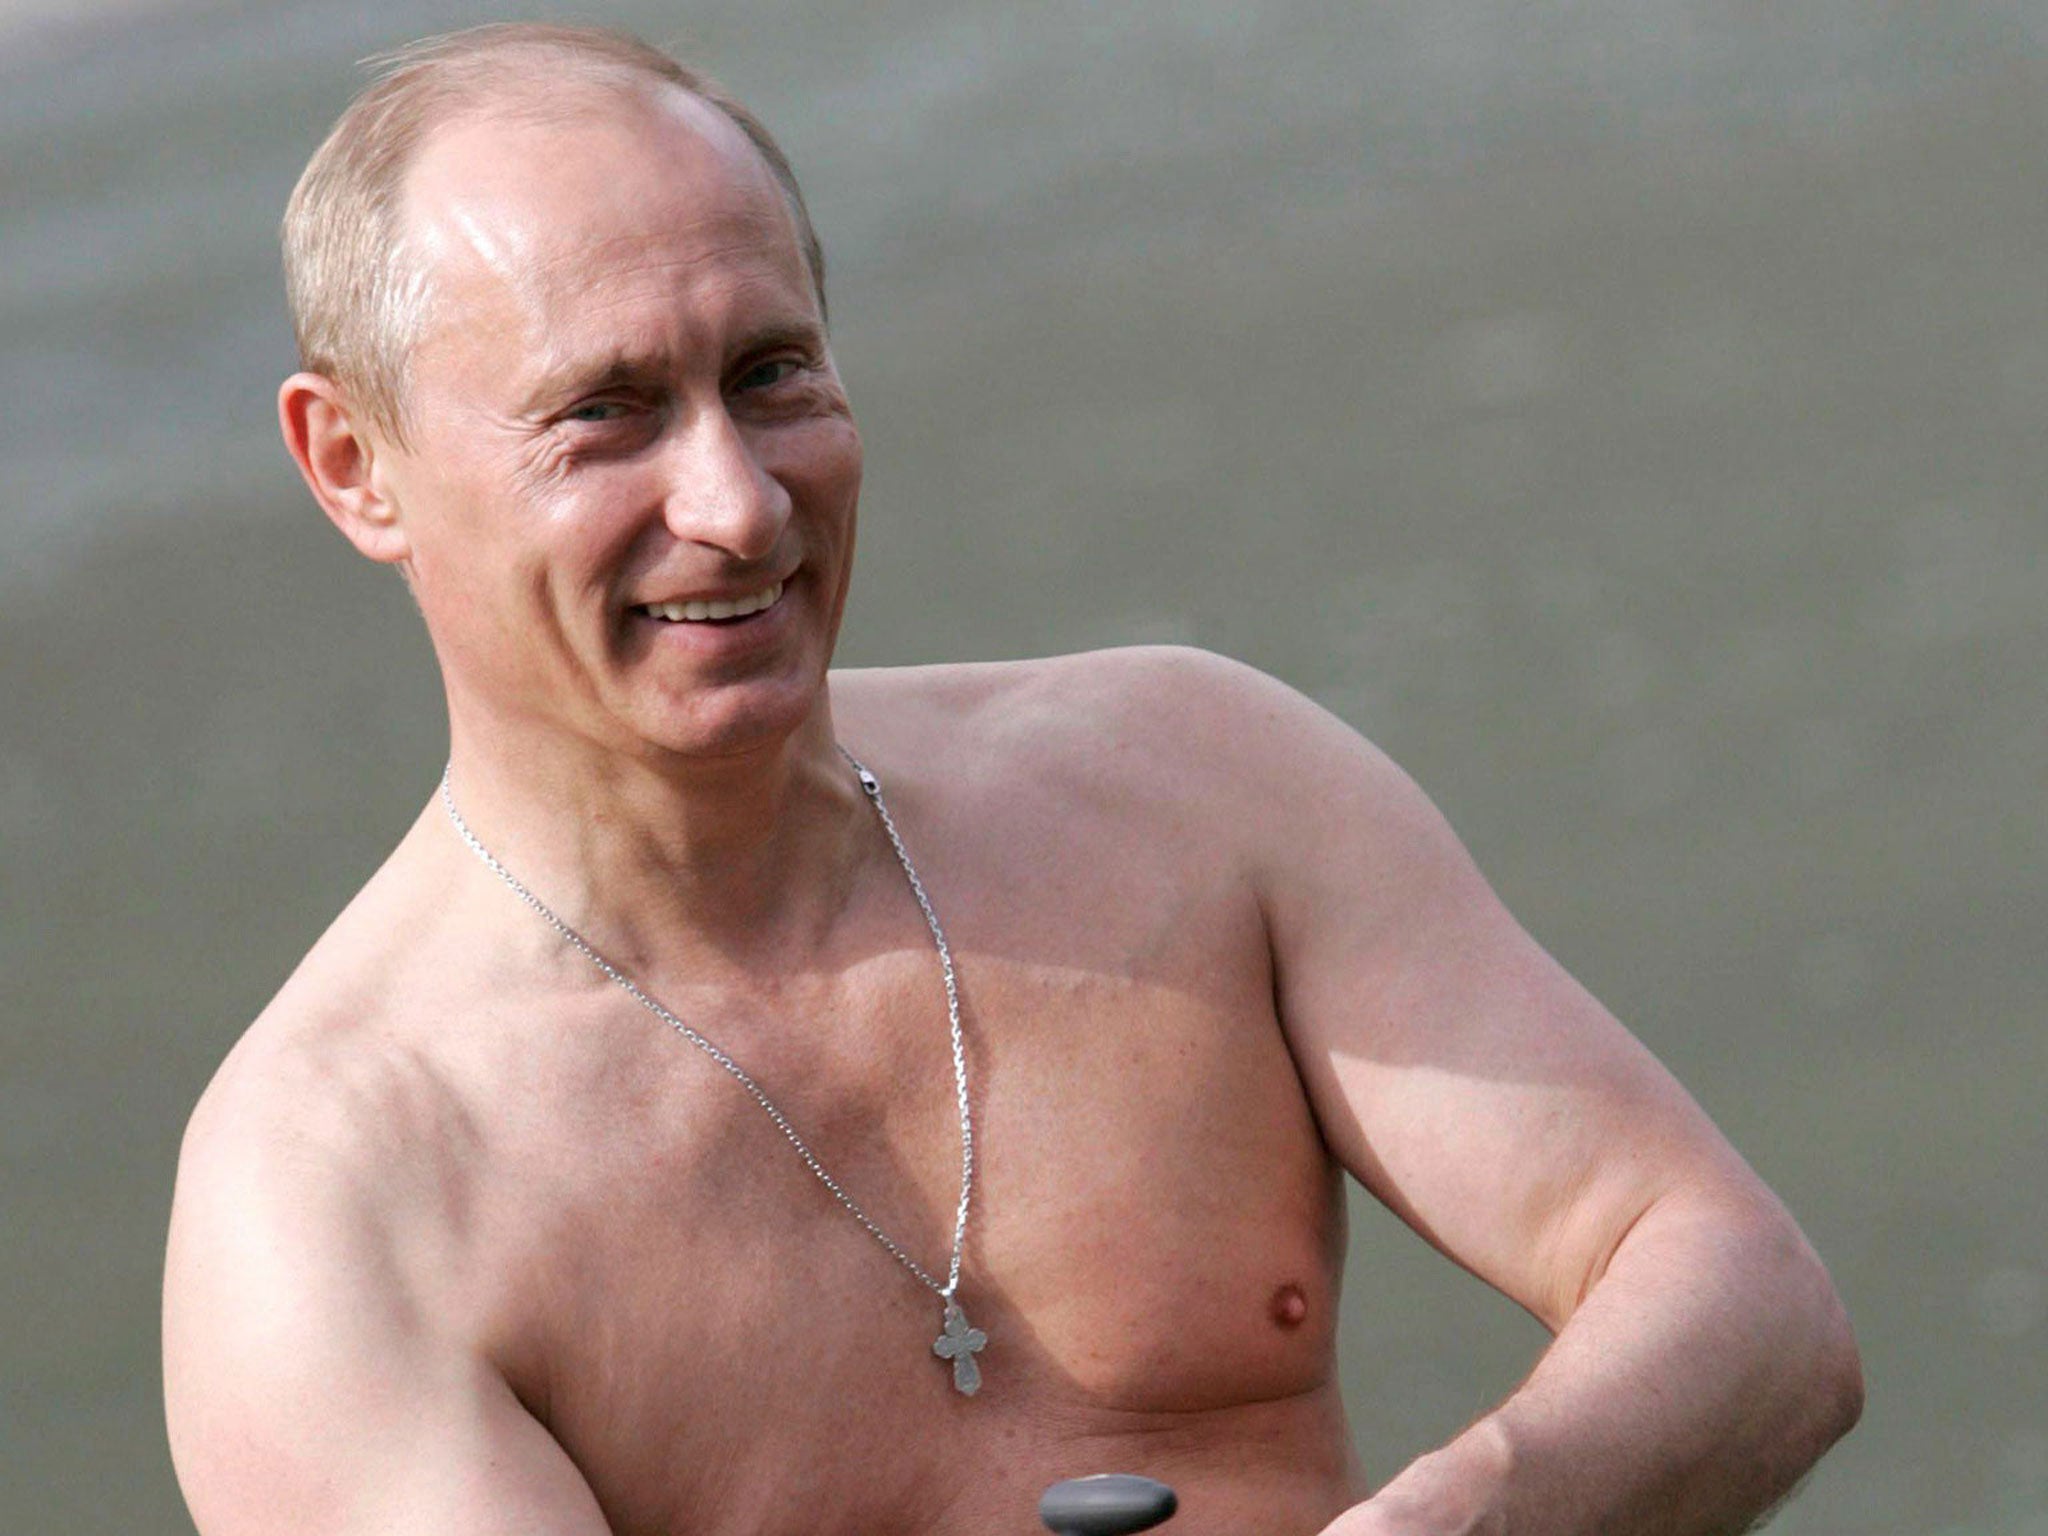 Fit as a fiddle: the real President Putin in the peak of health, fishing in 2007